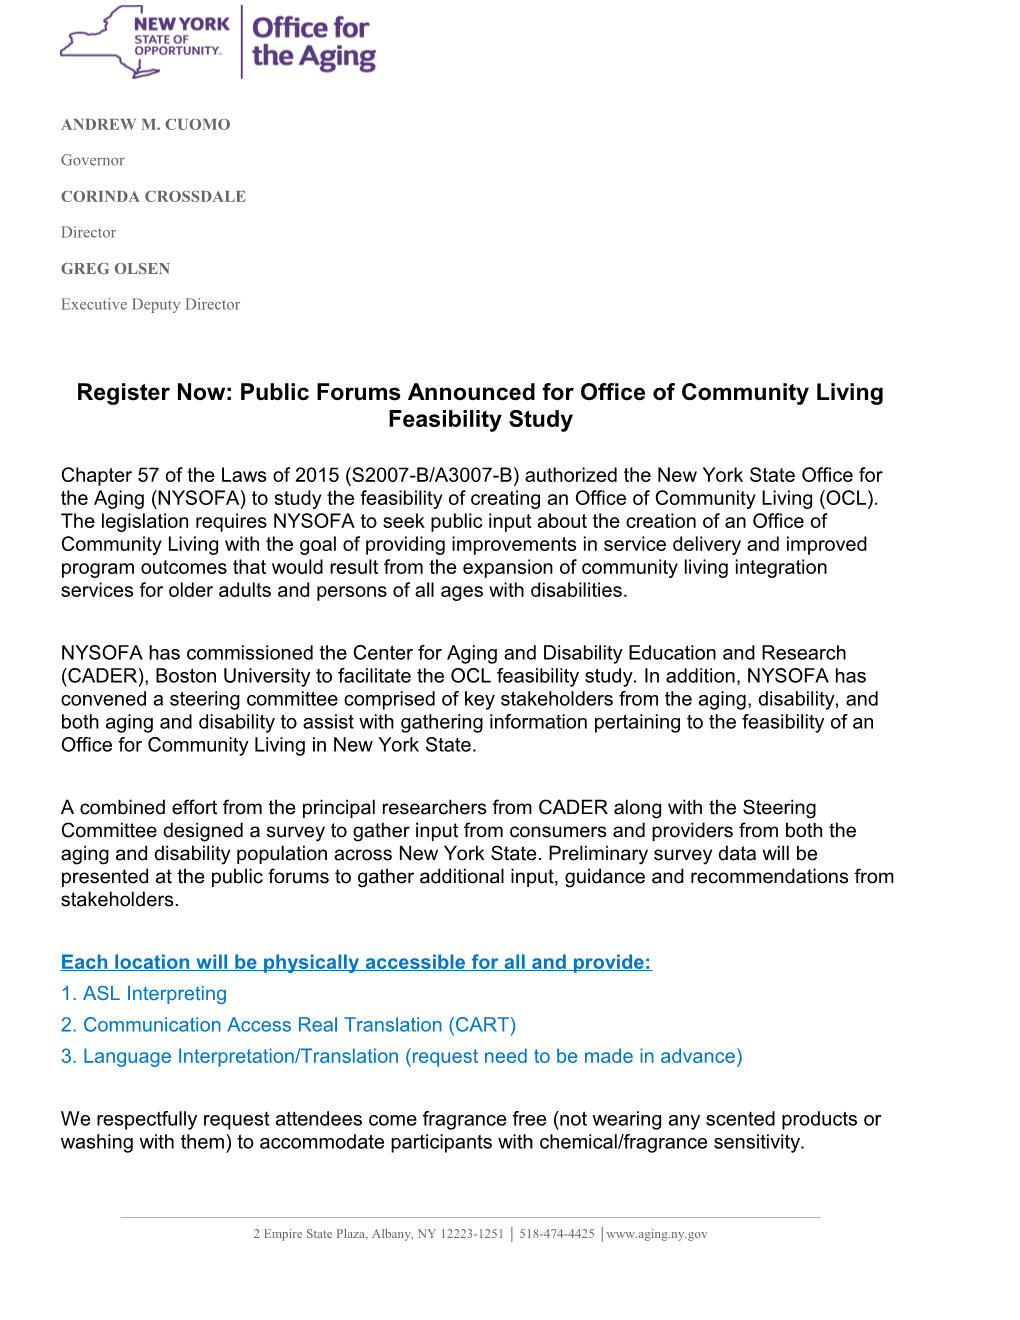 Register Now: Public Forums Announced for Office of Community Living Feasibility Study